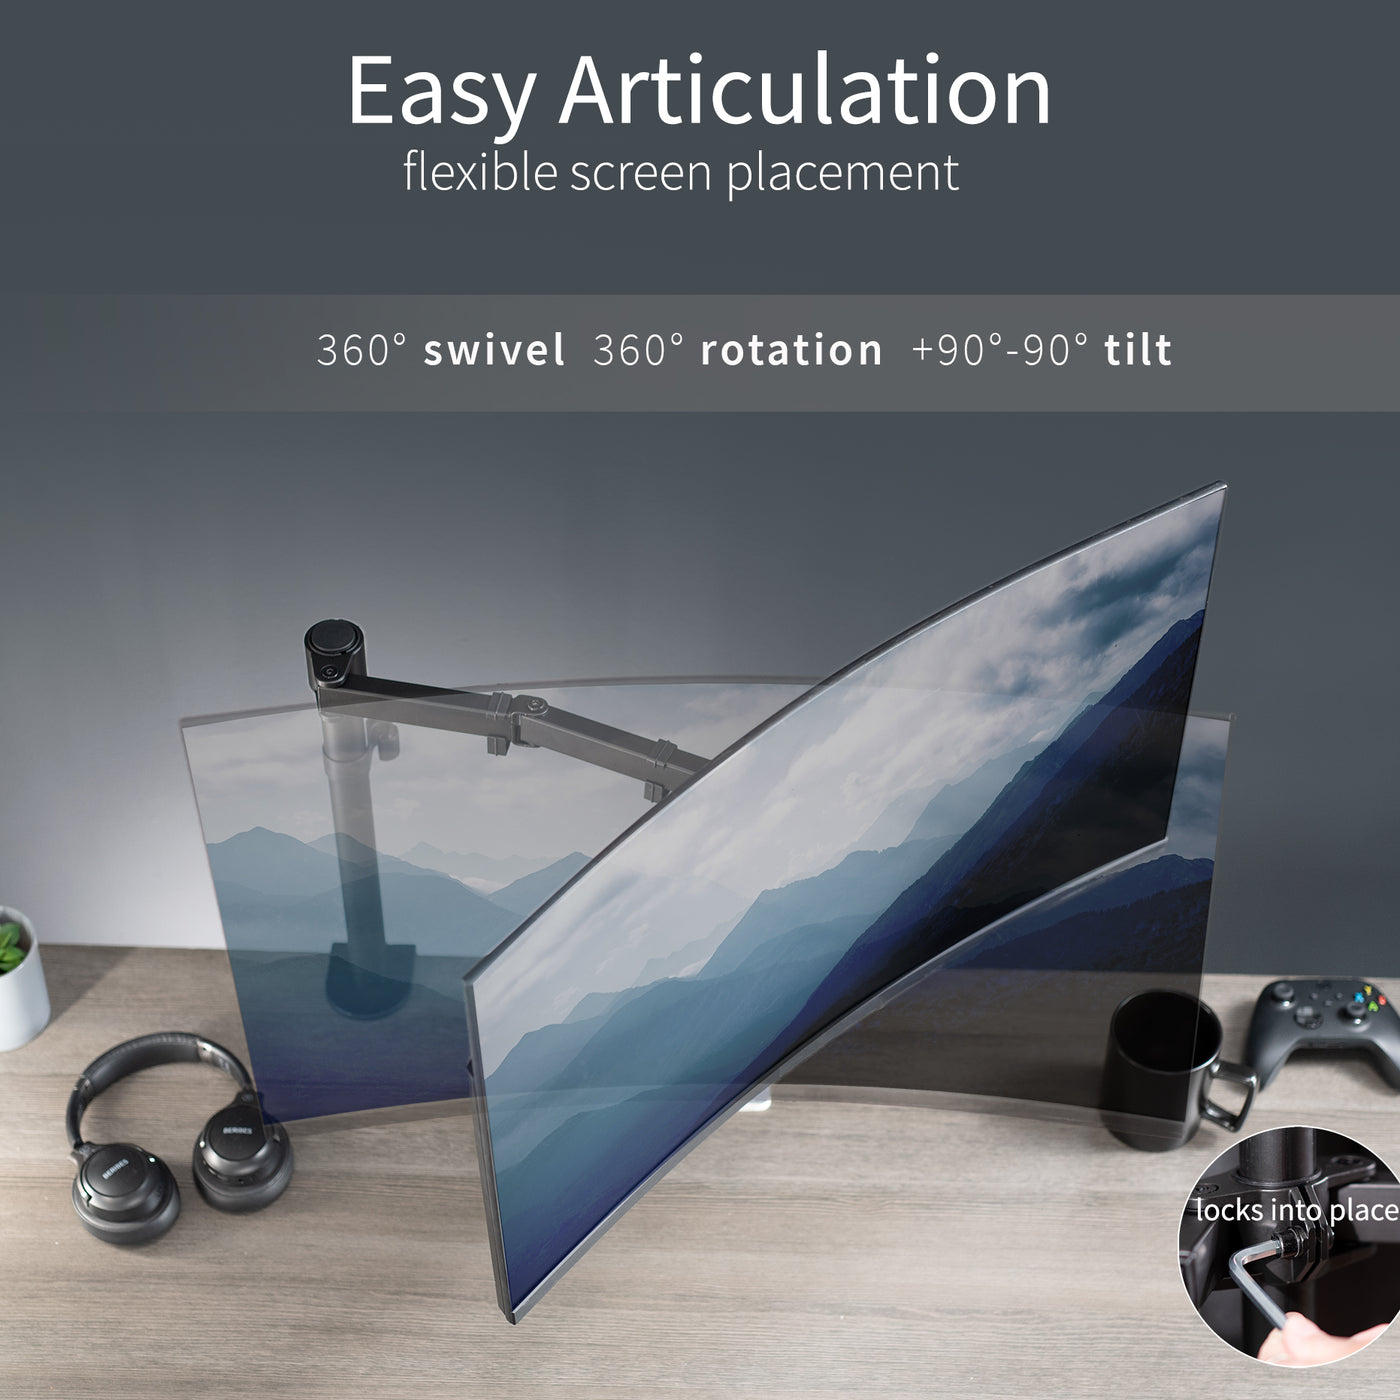 Single monitor desk mount from VIVO with flexible screen placement and articulation.